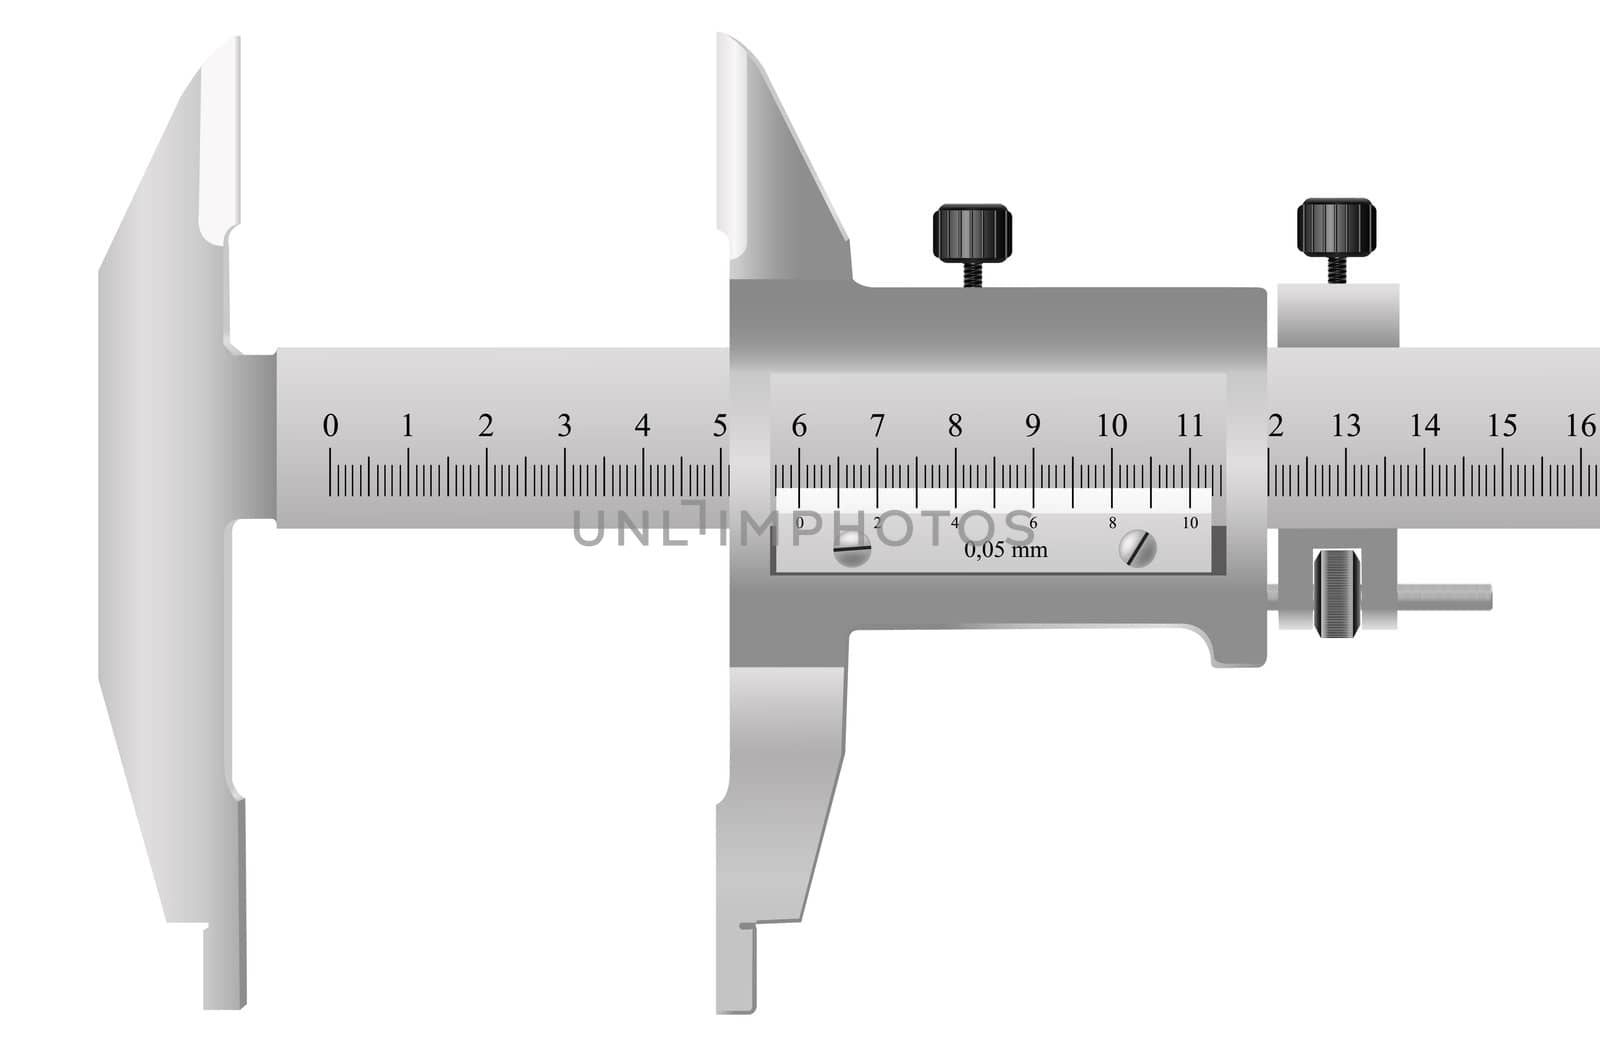 The measuring tool for quality assurance of details in mechanical engineering and in other manufactures